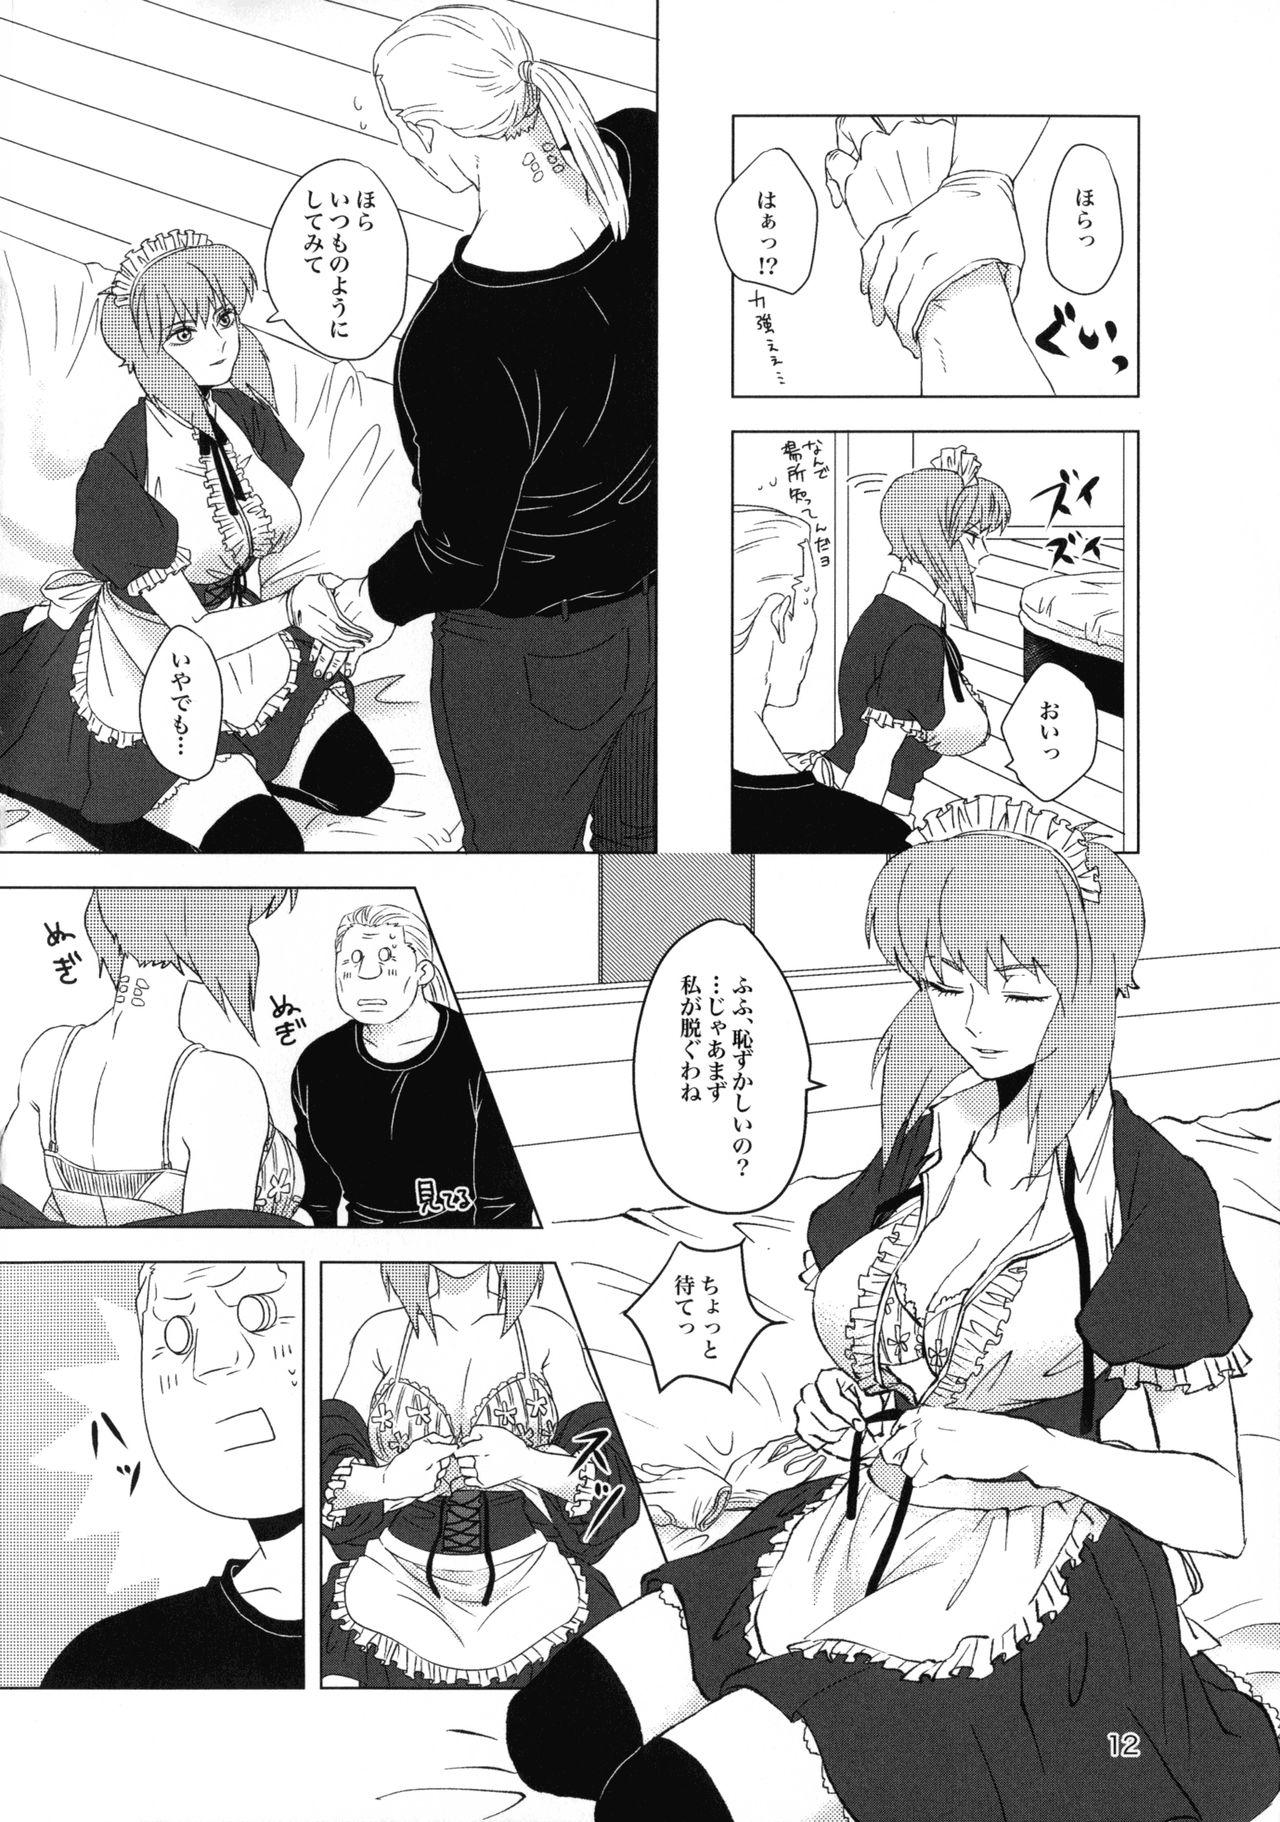 Safadinha FRENCHMAIDCOSTUME BTMT - Ghost in the shell Gay Kissing - Page 12